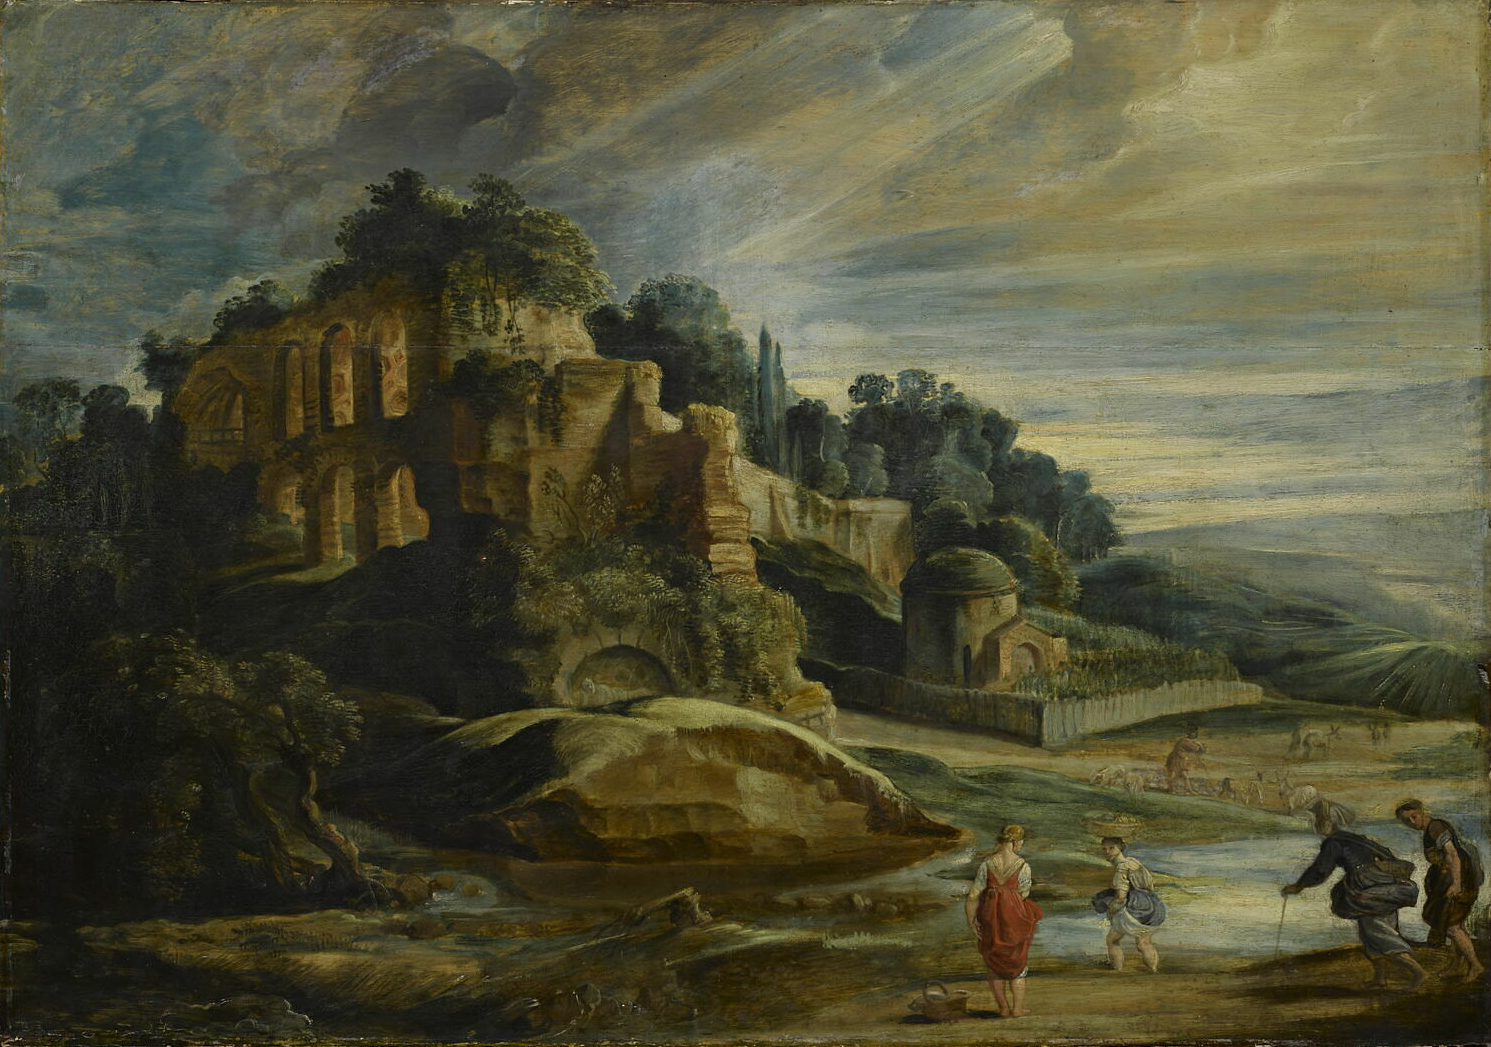 A painting depicting the ruins of a stone structure that is covered in green vegetation and surrounded by hills and trees. In the foreground, four figures are walking toward the structure. Above them is a very cloudy gray sky.